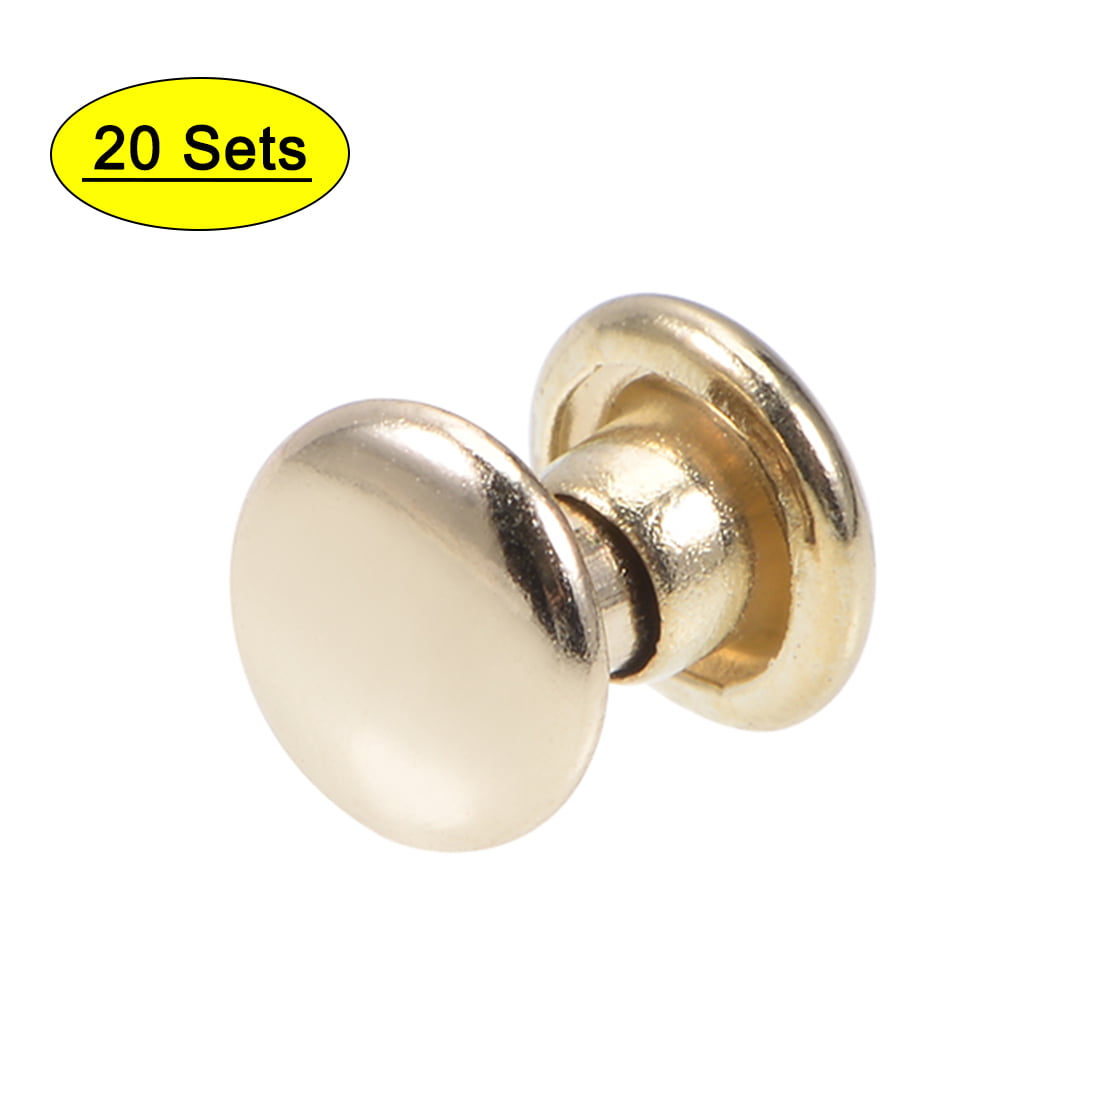 Craft Tools 6mm 8mm Metal Double Cap Rivets Studs Round Rivet For Leather  Craft Bag Belt Garments Hat Shoes Pet Collar DIY Repair3833510 From Ygcy,  $41.79